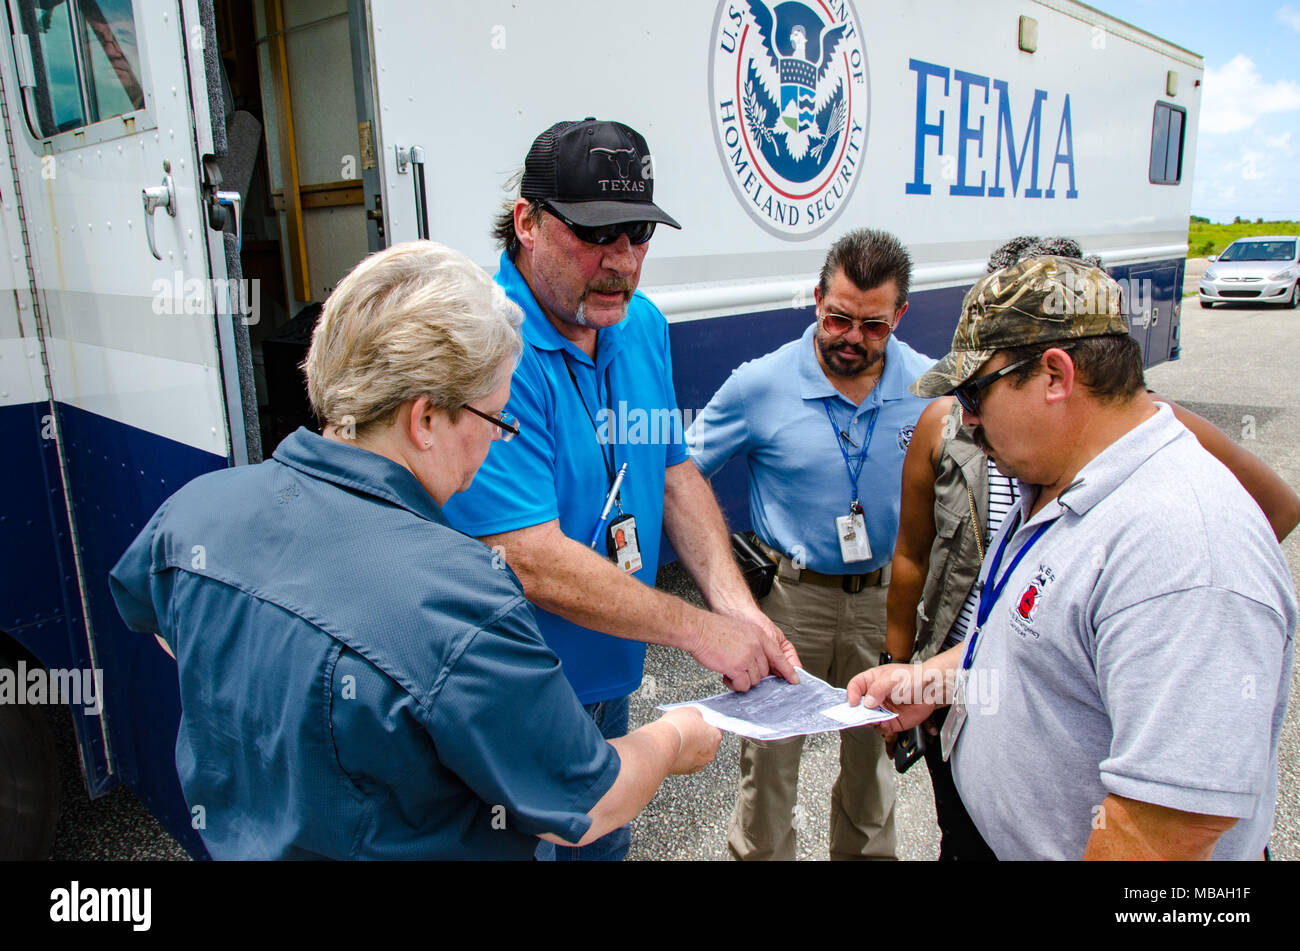 Aguadilla, P.R.--FEMA External Support Branch Director Linwood Gantt Jr.(black cap), and his team are at the Rafael Hernandez Airport to set up an Incident Support Base (ISB) and coordinate delivery of supplies to support the response to Hurricane Irma. Stock Photo